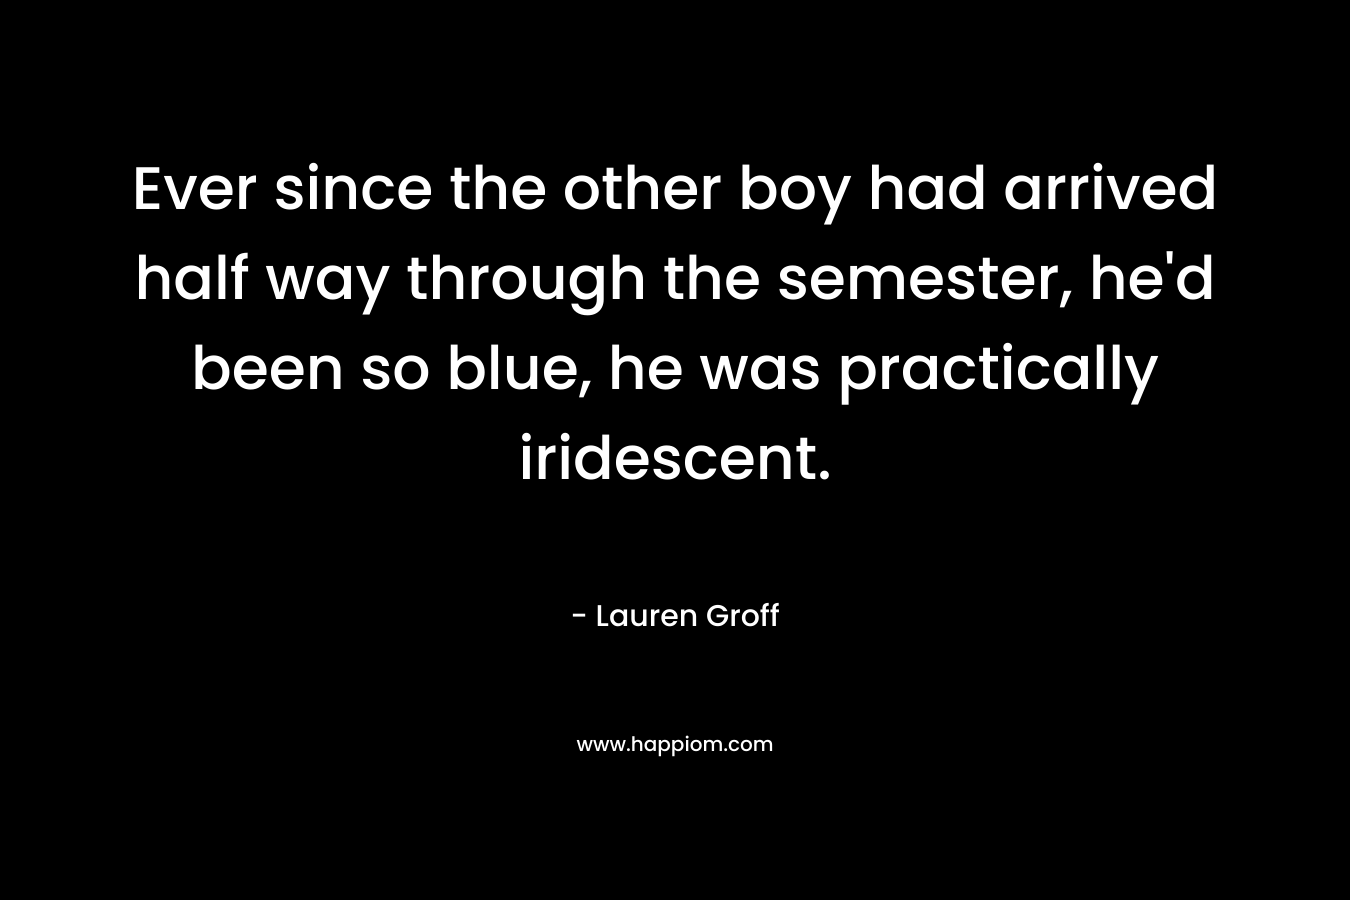 Ever since the other boy had arrived half way through the semester, he’d been so blue, he was practically iridescent. – Lauren Groff